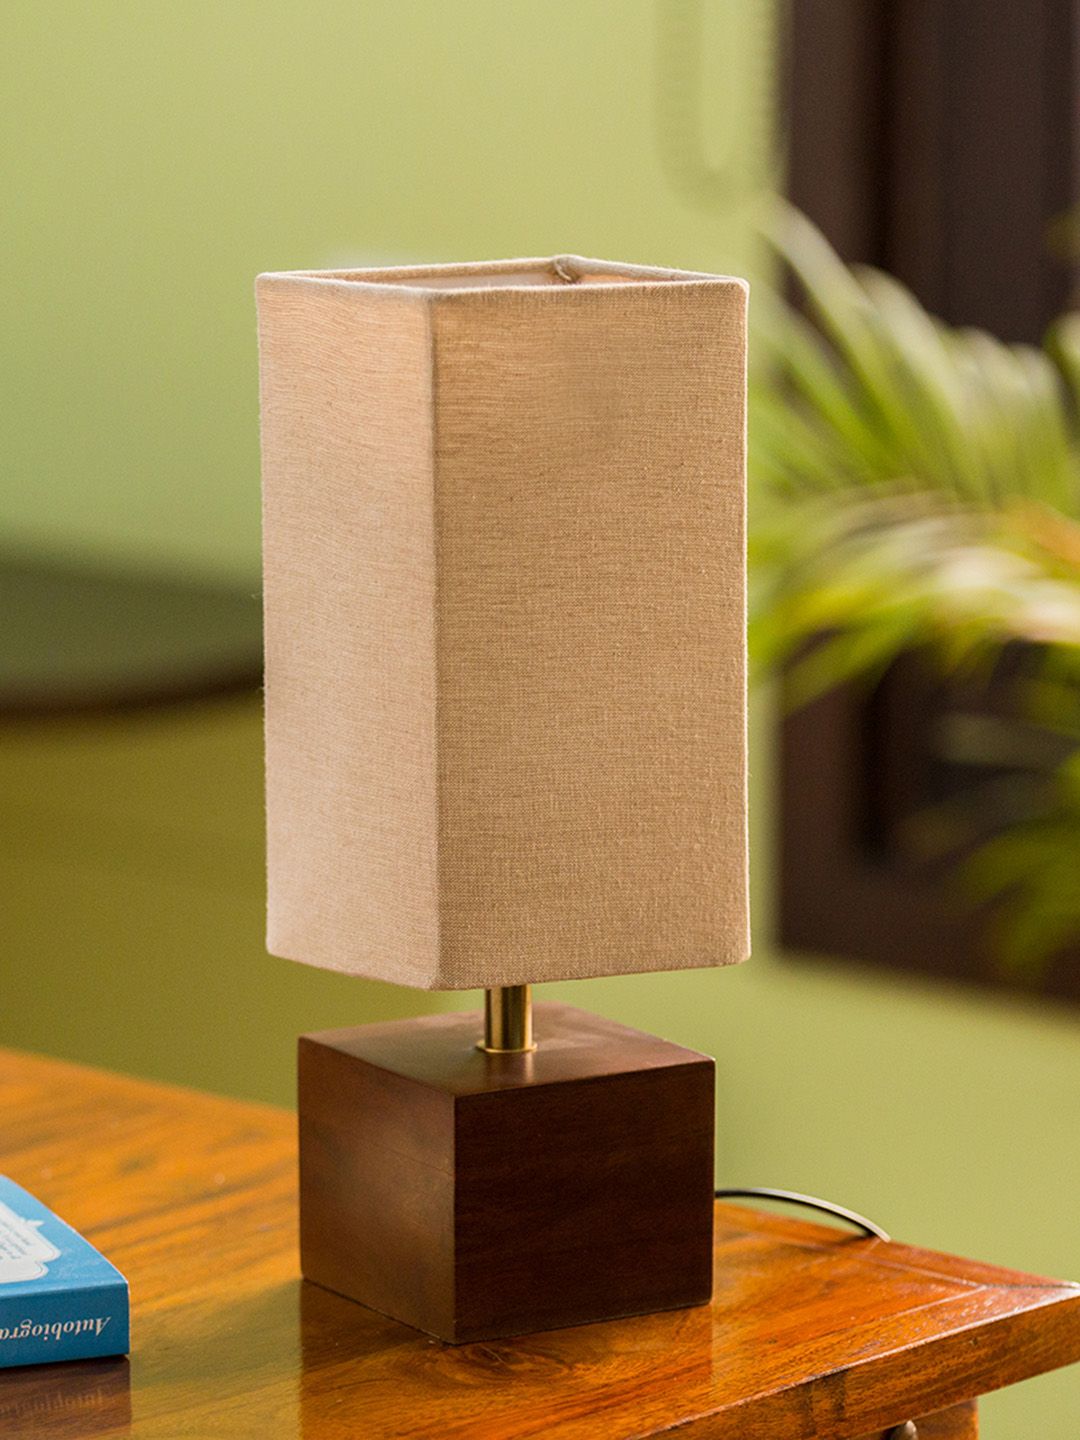 ExclusiveLane Beige 12 inch Cubic Mango Wooden Column Table Lamp with Shade Price in India